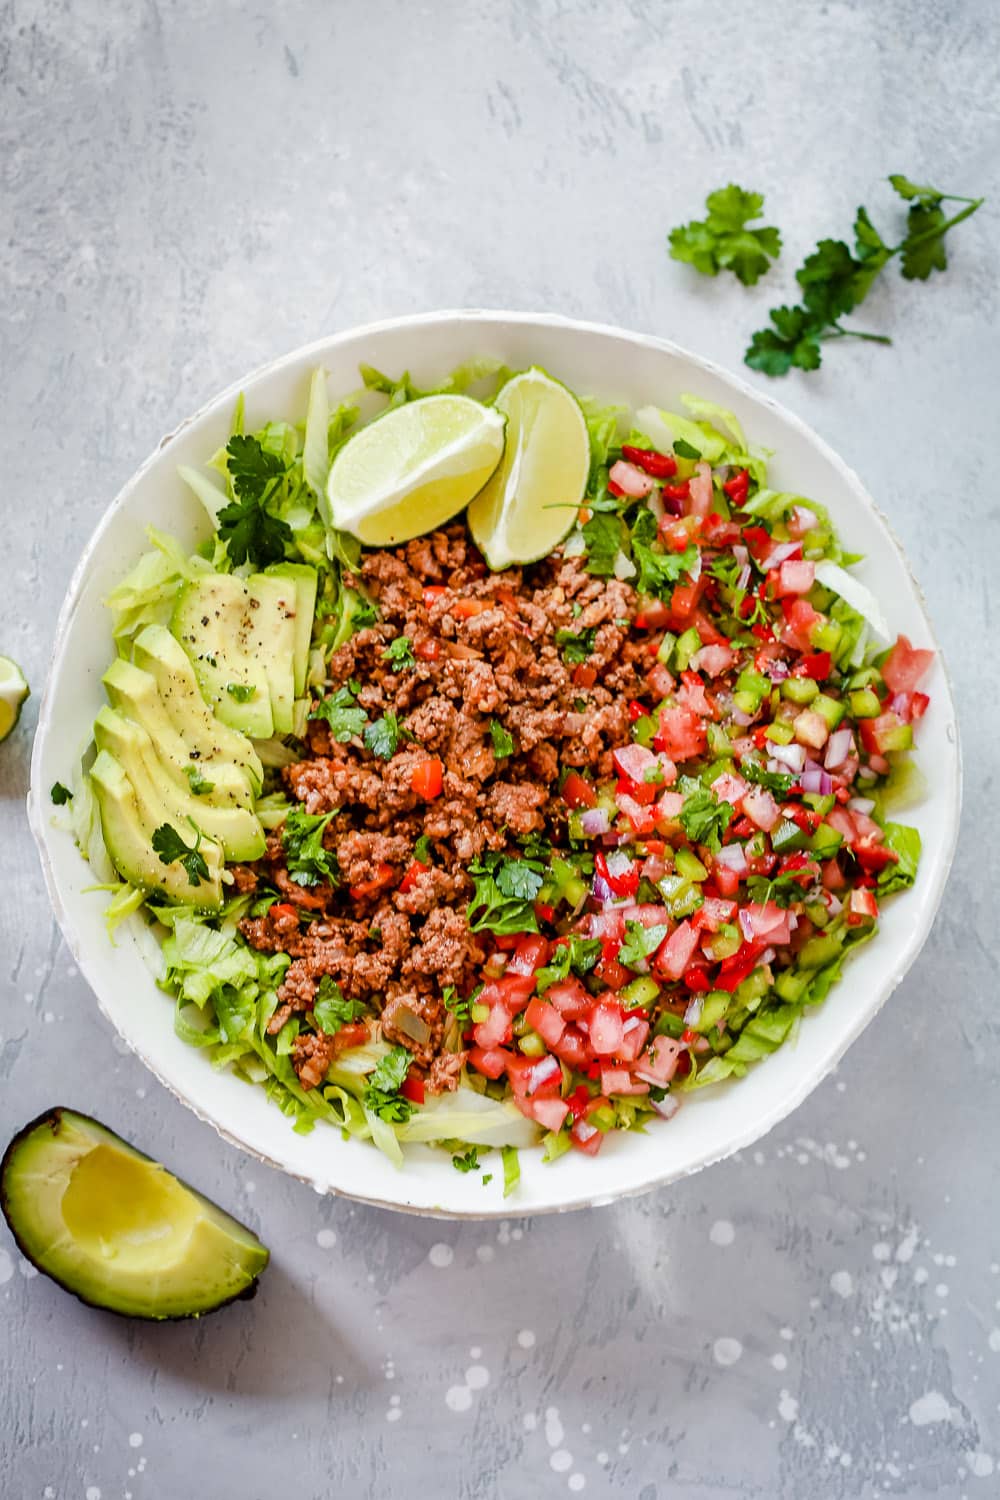 Ground Beef Taco Salad with avocado slices and salsa